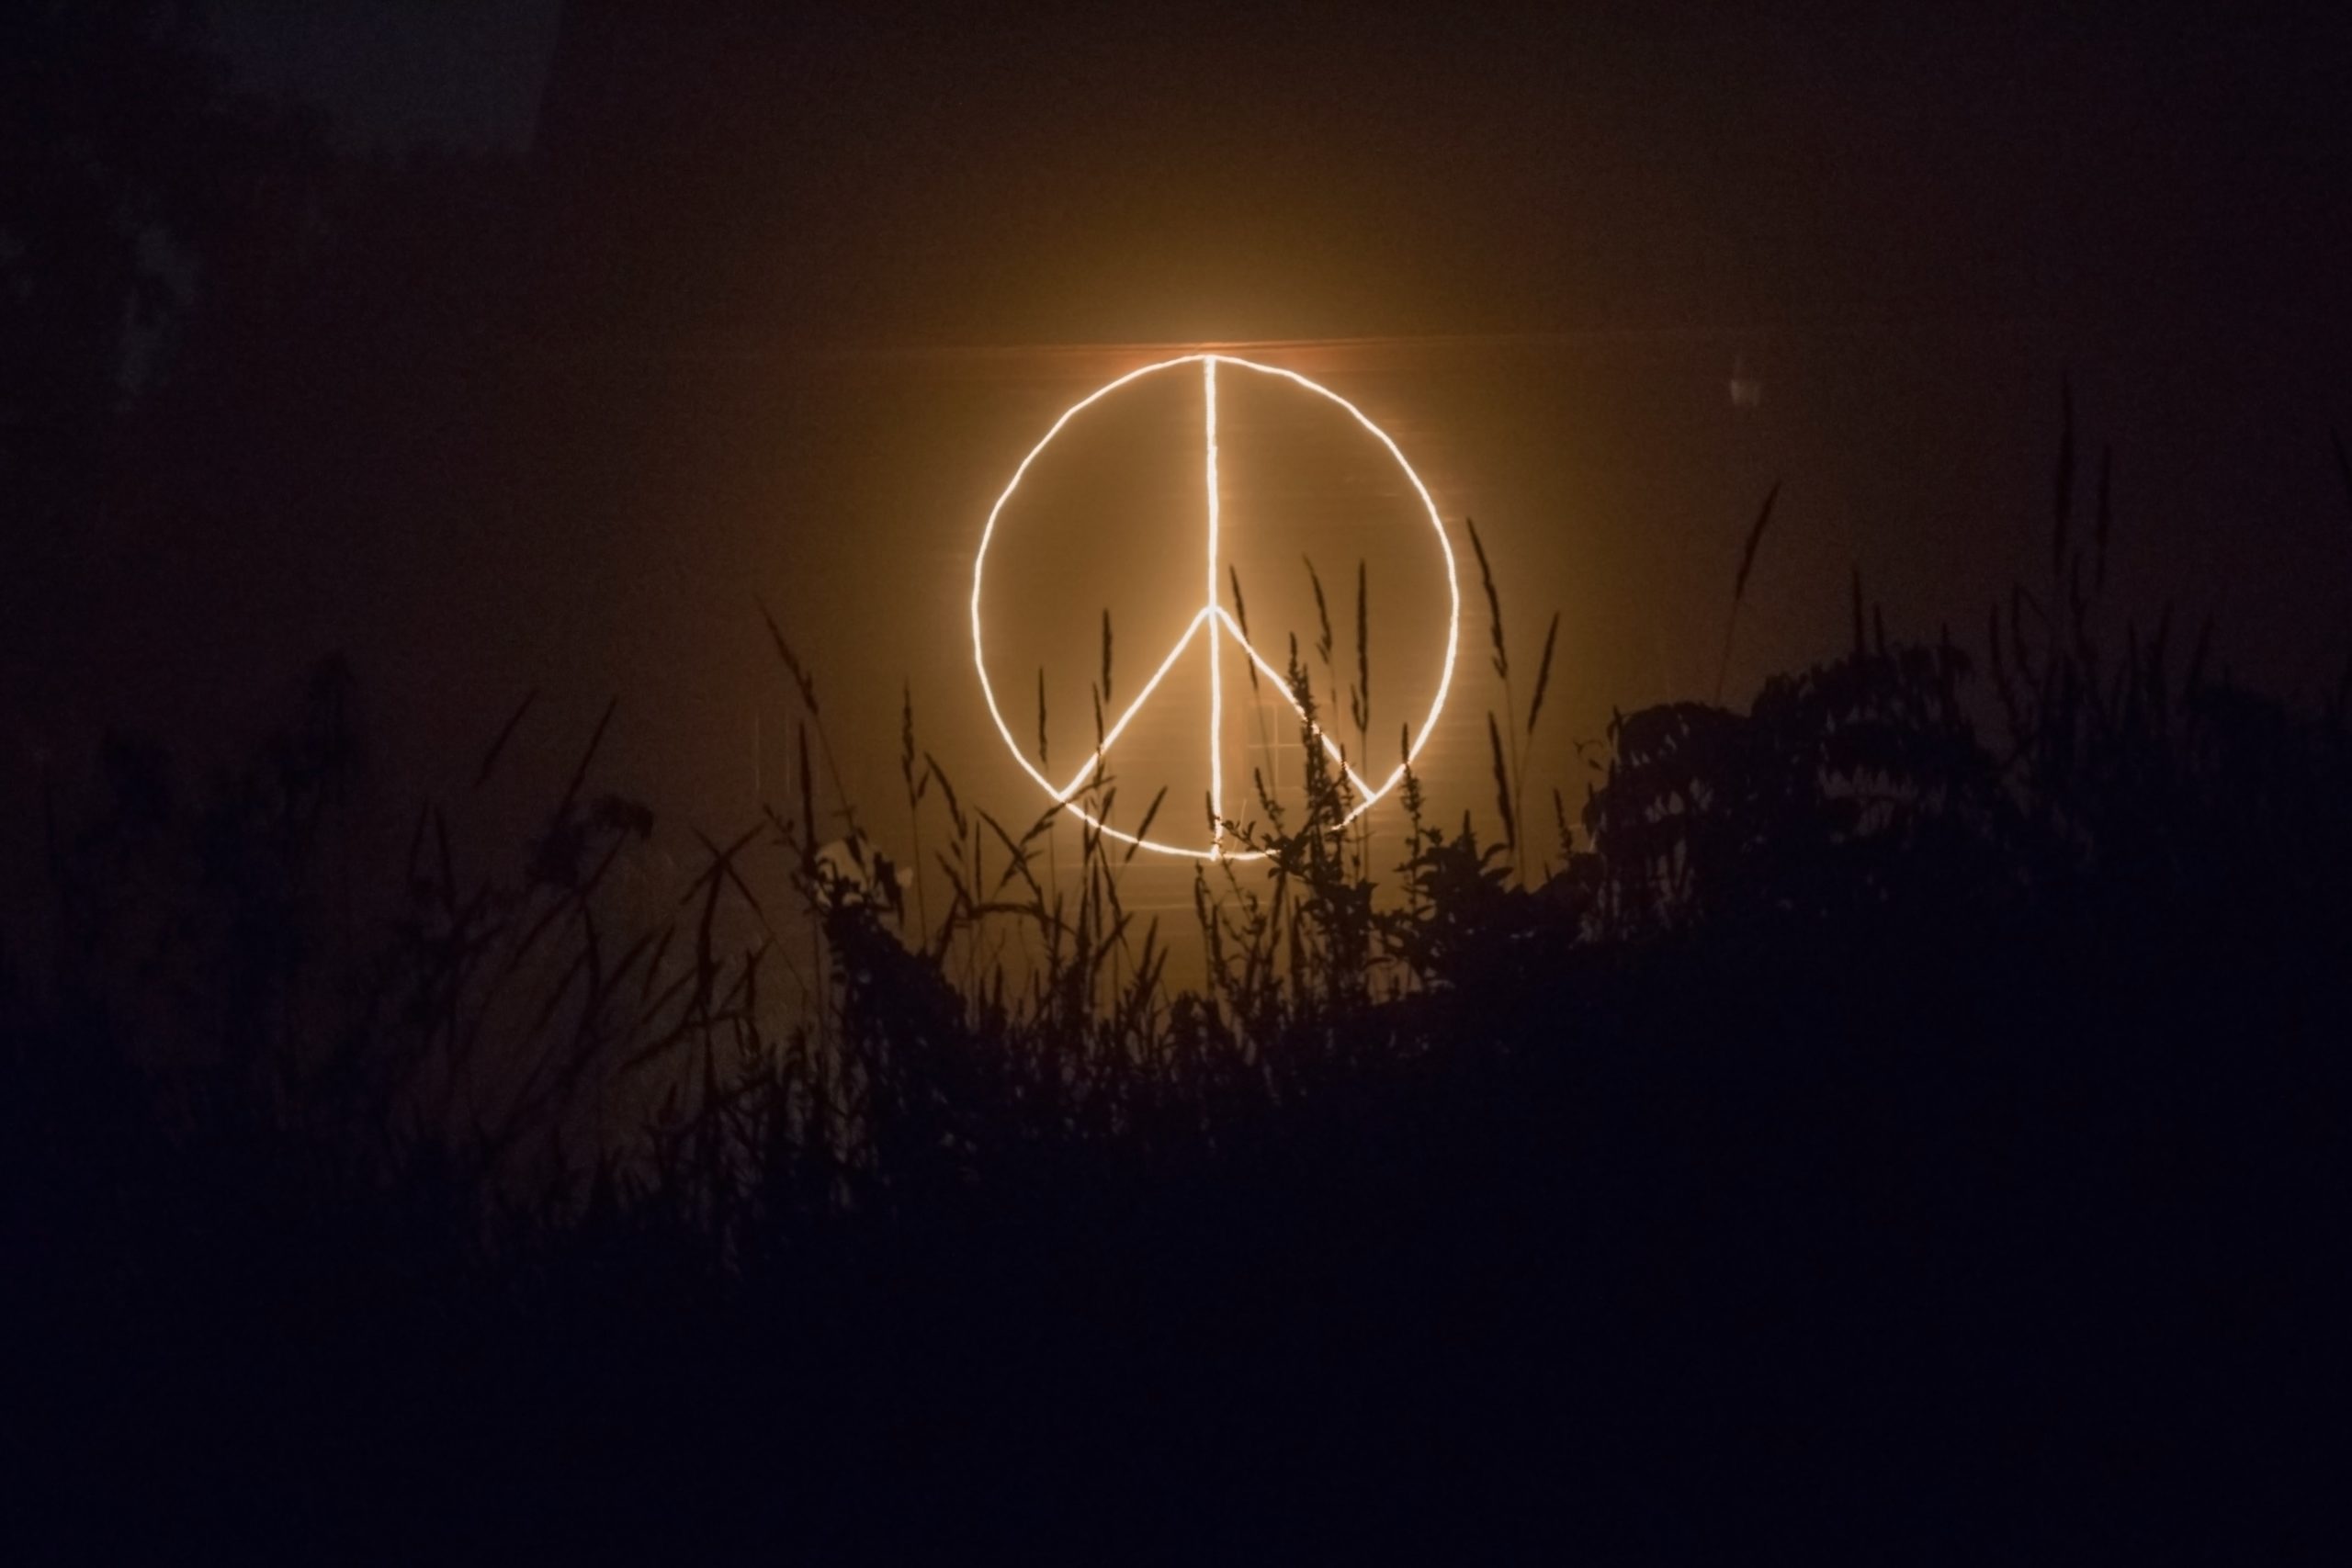 Lighted peace sign